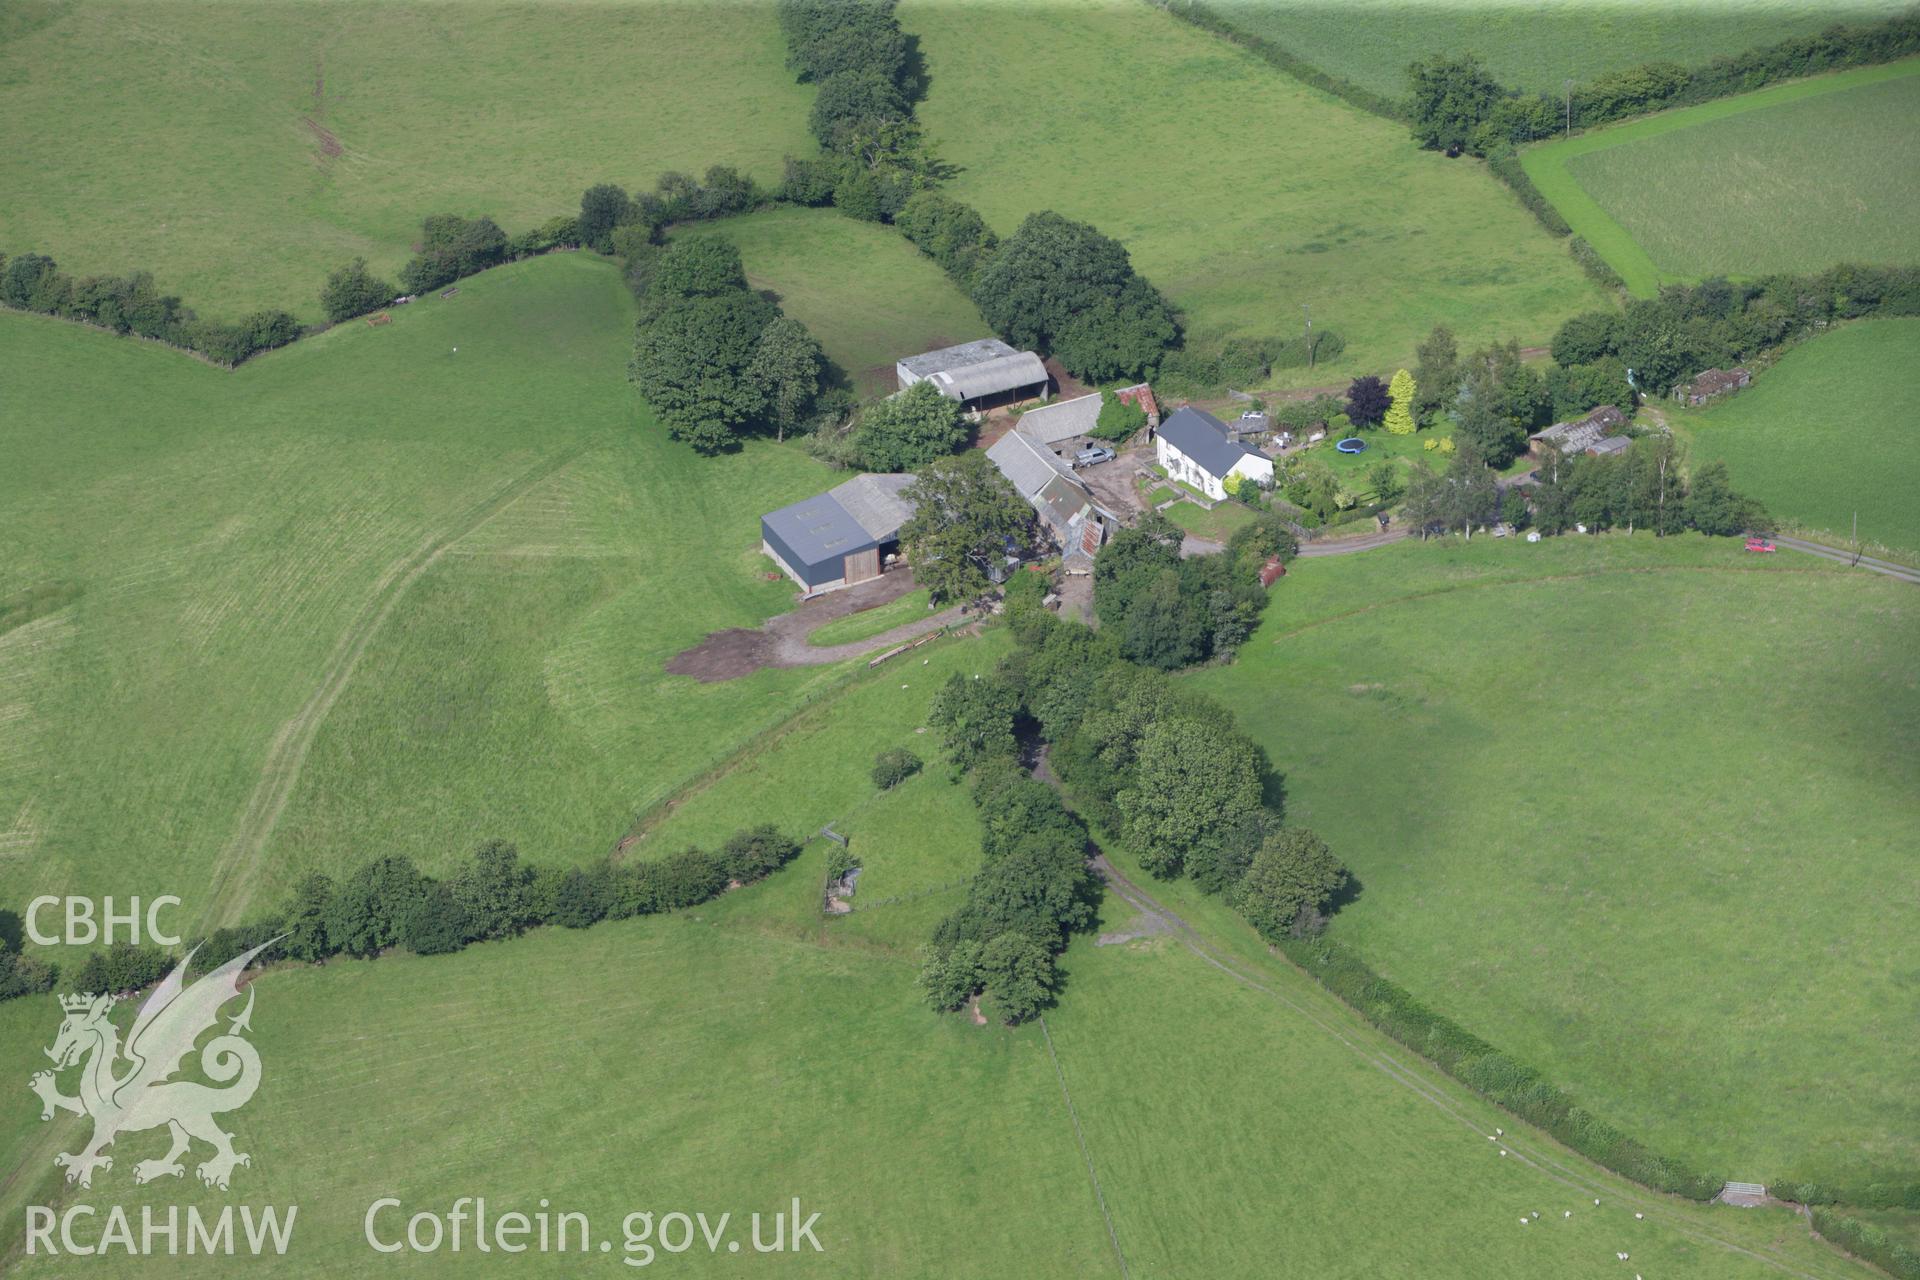 RCAHMW colour oblique aerial photograph of Tregaer Defended Enclosure. Taken on 23 July 2009 by Toby Driver